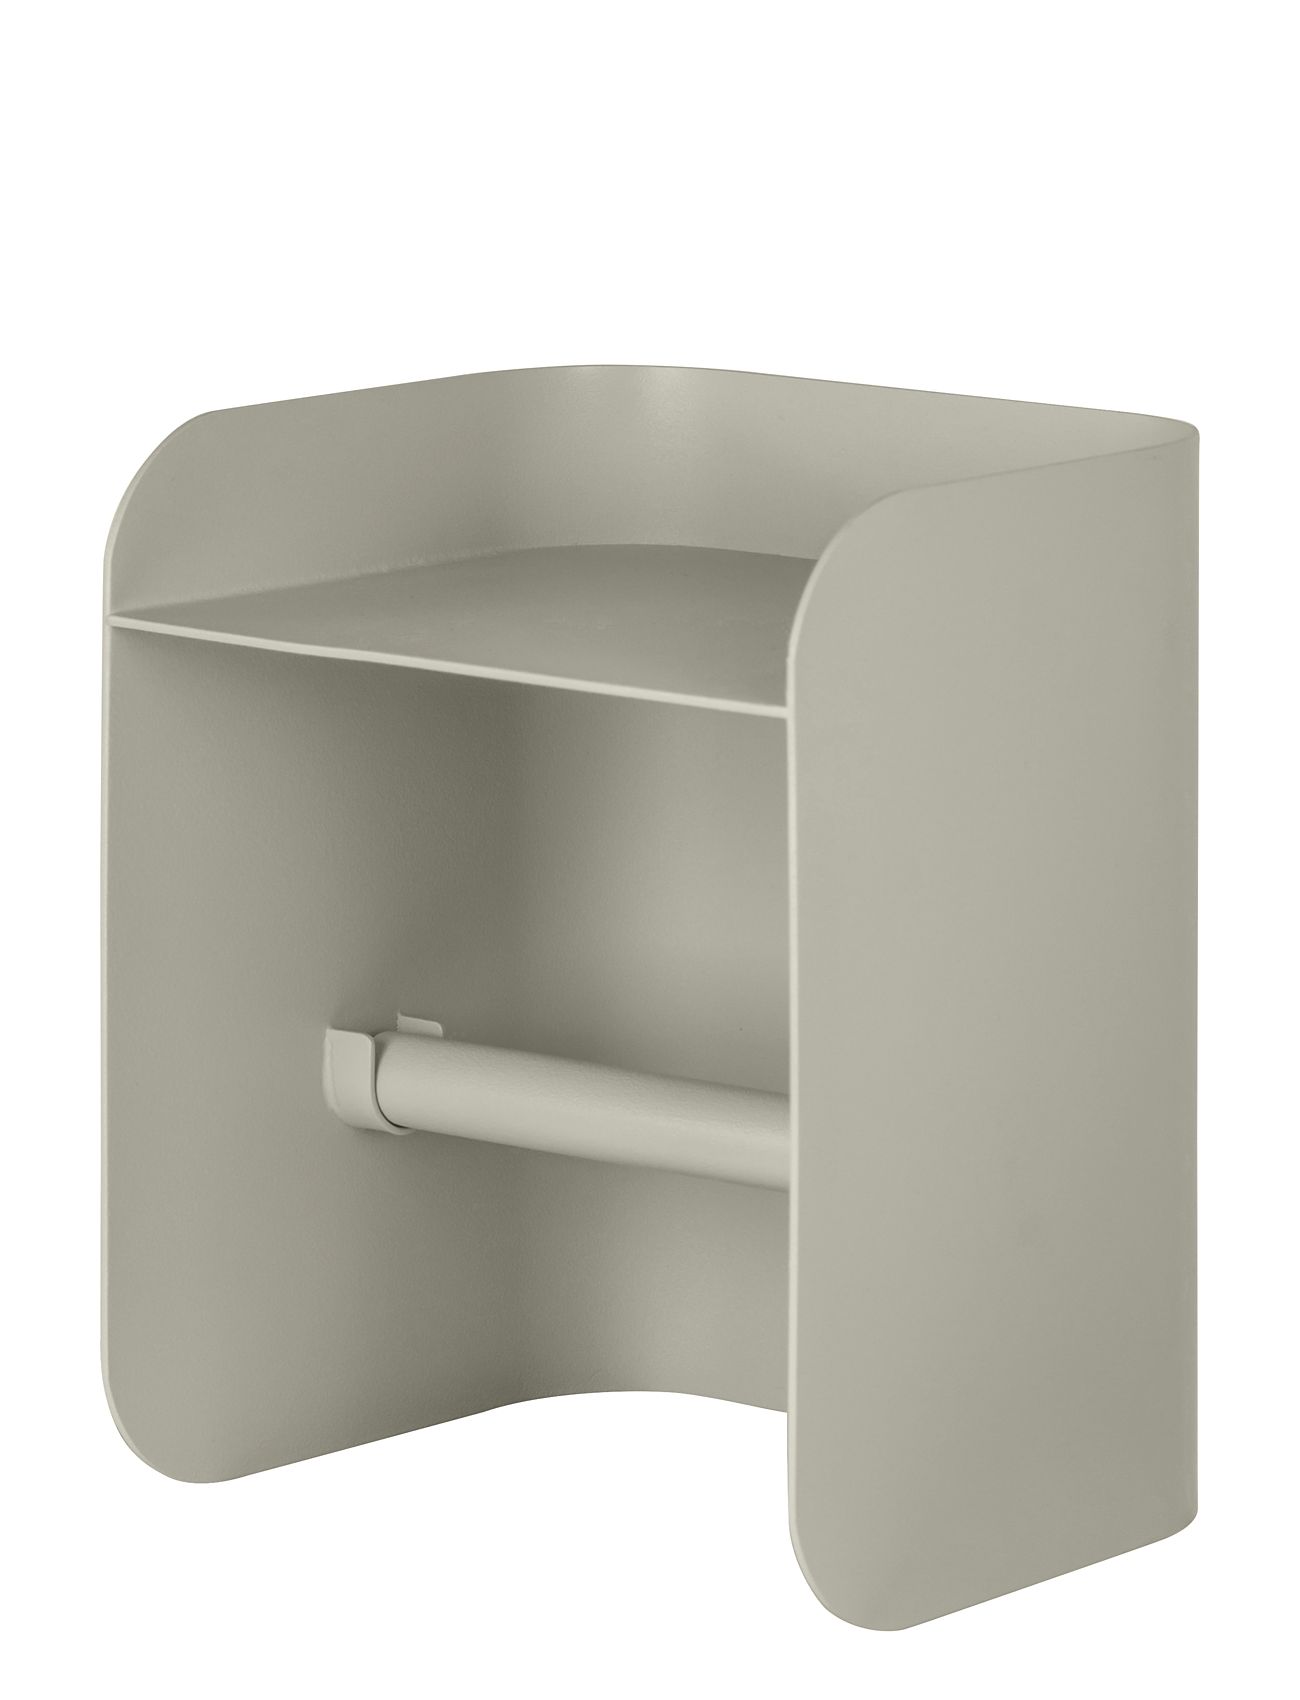 Mette Ditmer - CARRY toiletrulleholder - Sand